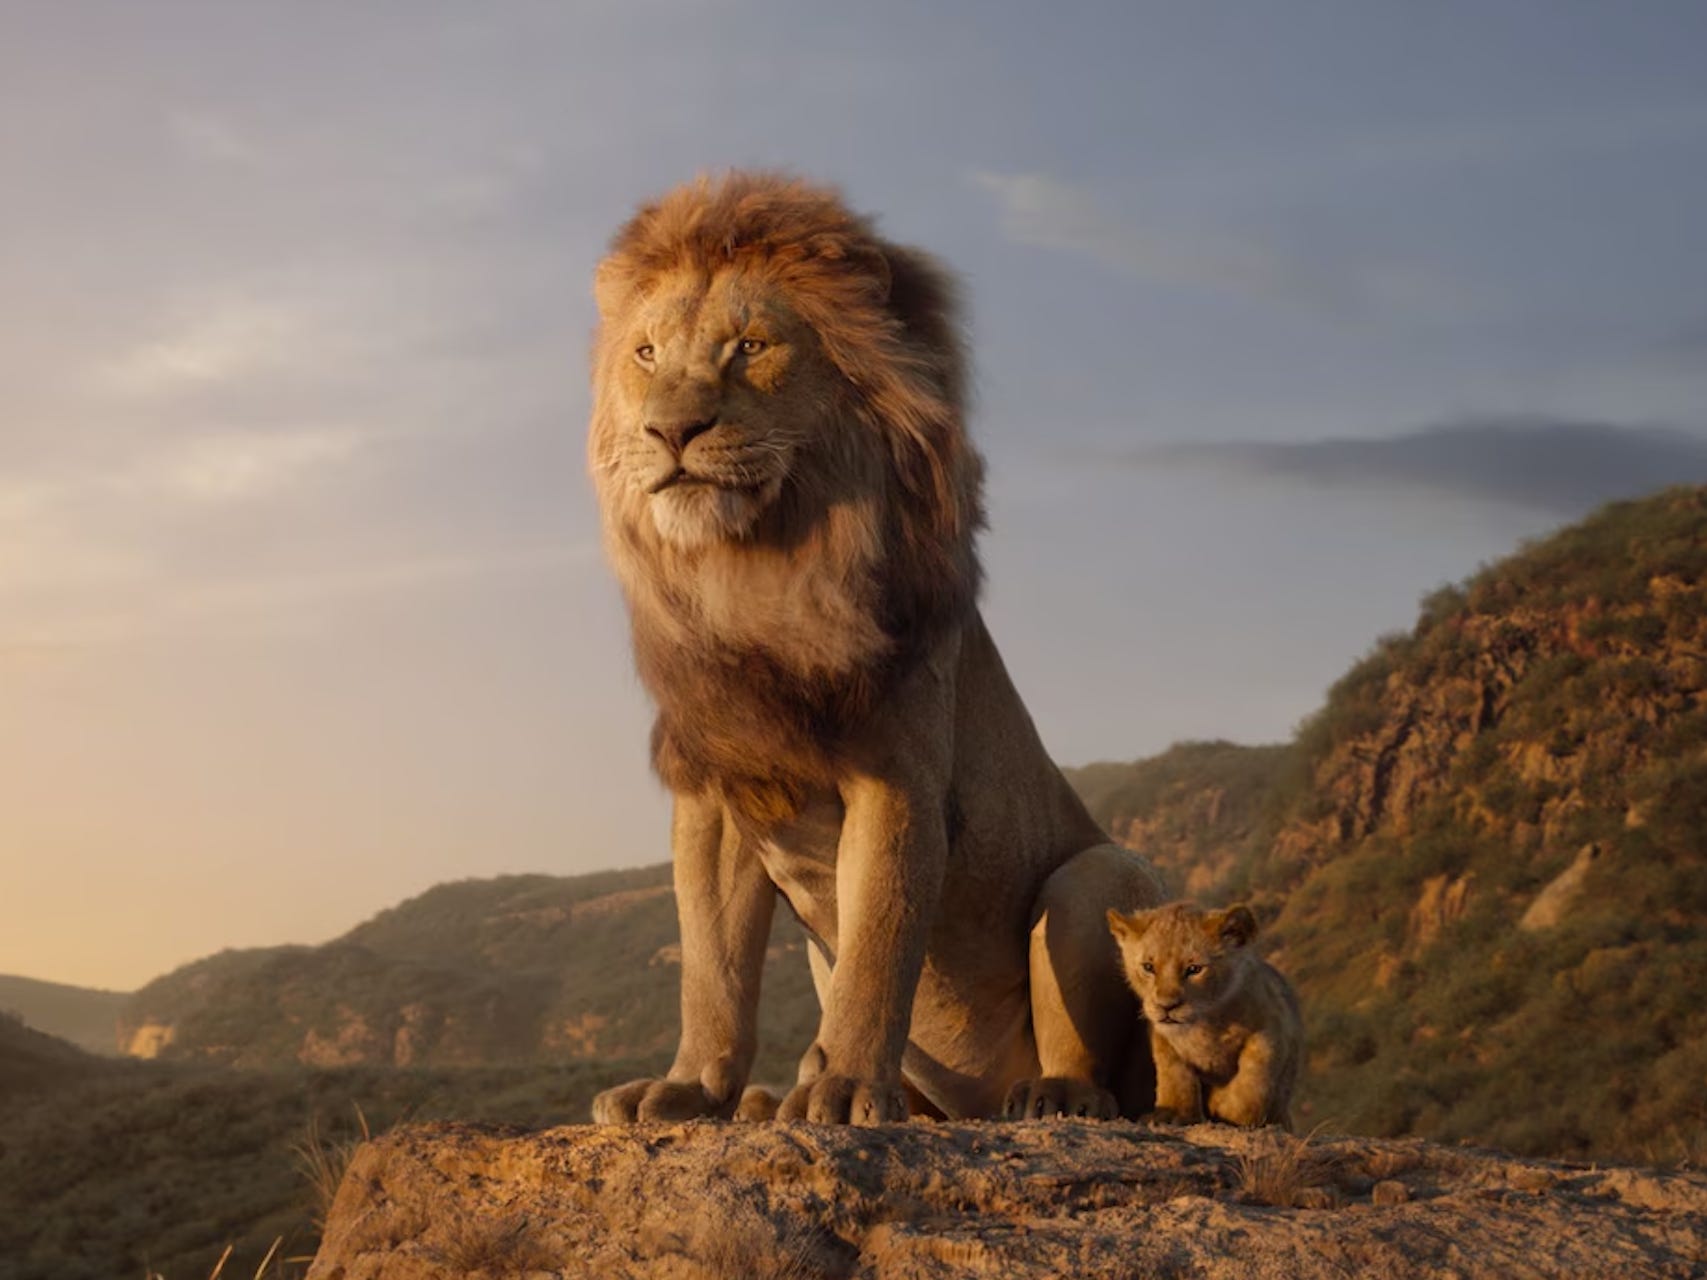 <p>If this was a silent film, 2019's "The Lion King" would be an <a href="https://www.businessinsider.com/disney-the-lion-king-review-2019-7">unparalleled achievement in special effects</a>. But, unfortunately, it's not.</p><p>Instead, we were forced to sit through some of the most iconic musical sequences in Disney history, like "I Just Can't Wait to Be King," "Hakuna Matata," "Can You Feel the Love Tonight," and "Be Prepared," being sung by photorealistic animals who can't emote, in a relatively colorless virtual desert.</p><p>Part of the magic of animation is that you can make the animals do anything you want — that's why we love the 1994 original so much.</p><p>We'll always be thankful that we got Beyoncé's "The Lion King: The Gift" companion album out of this movie, but that's it.</p>